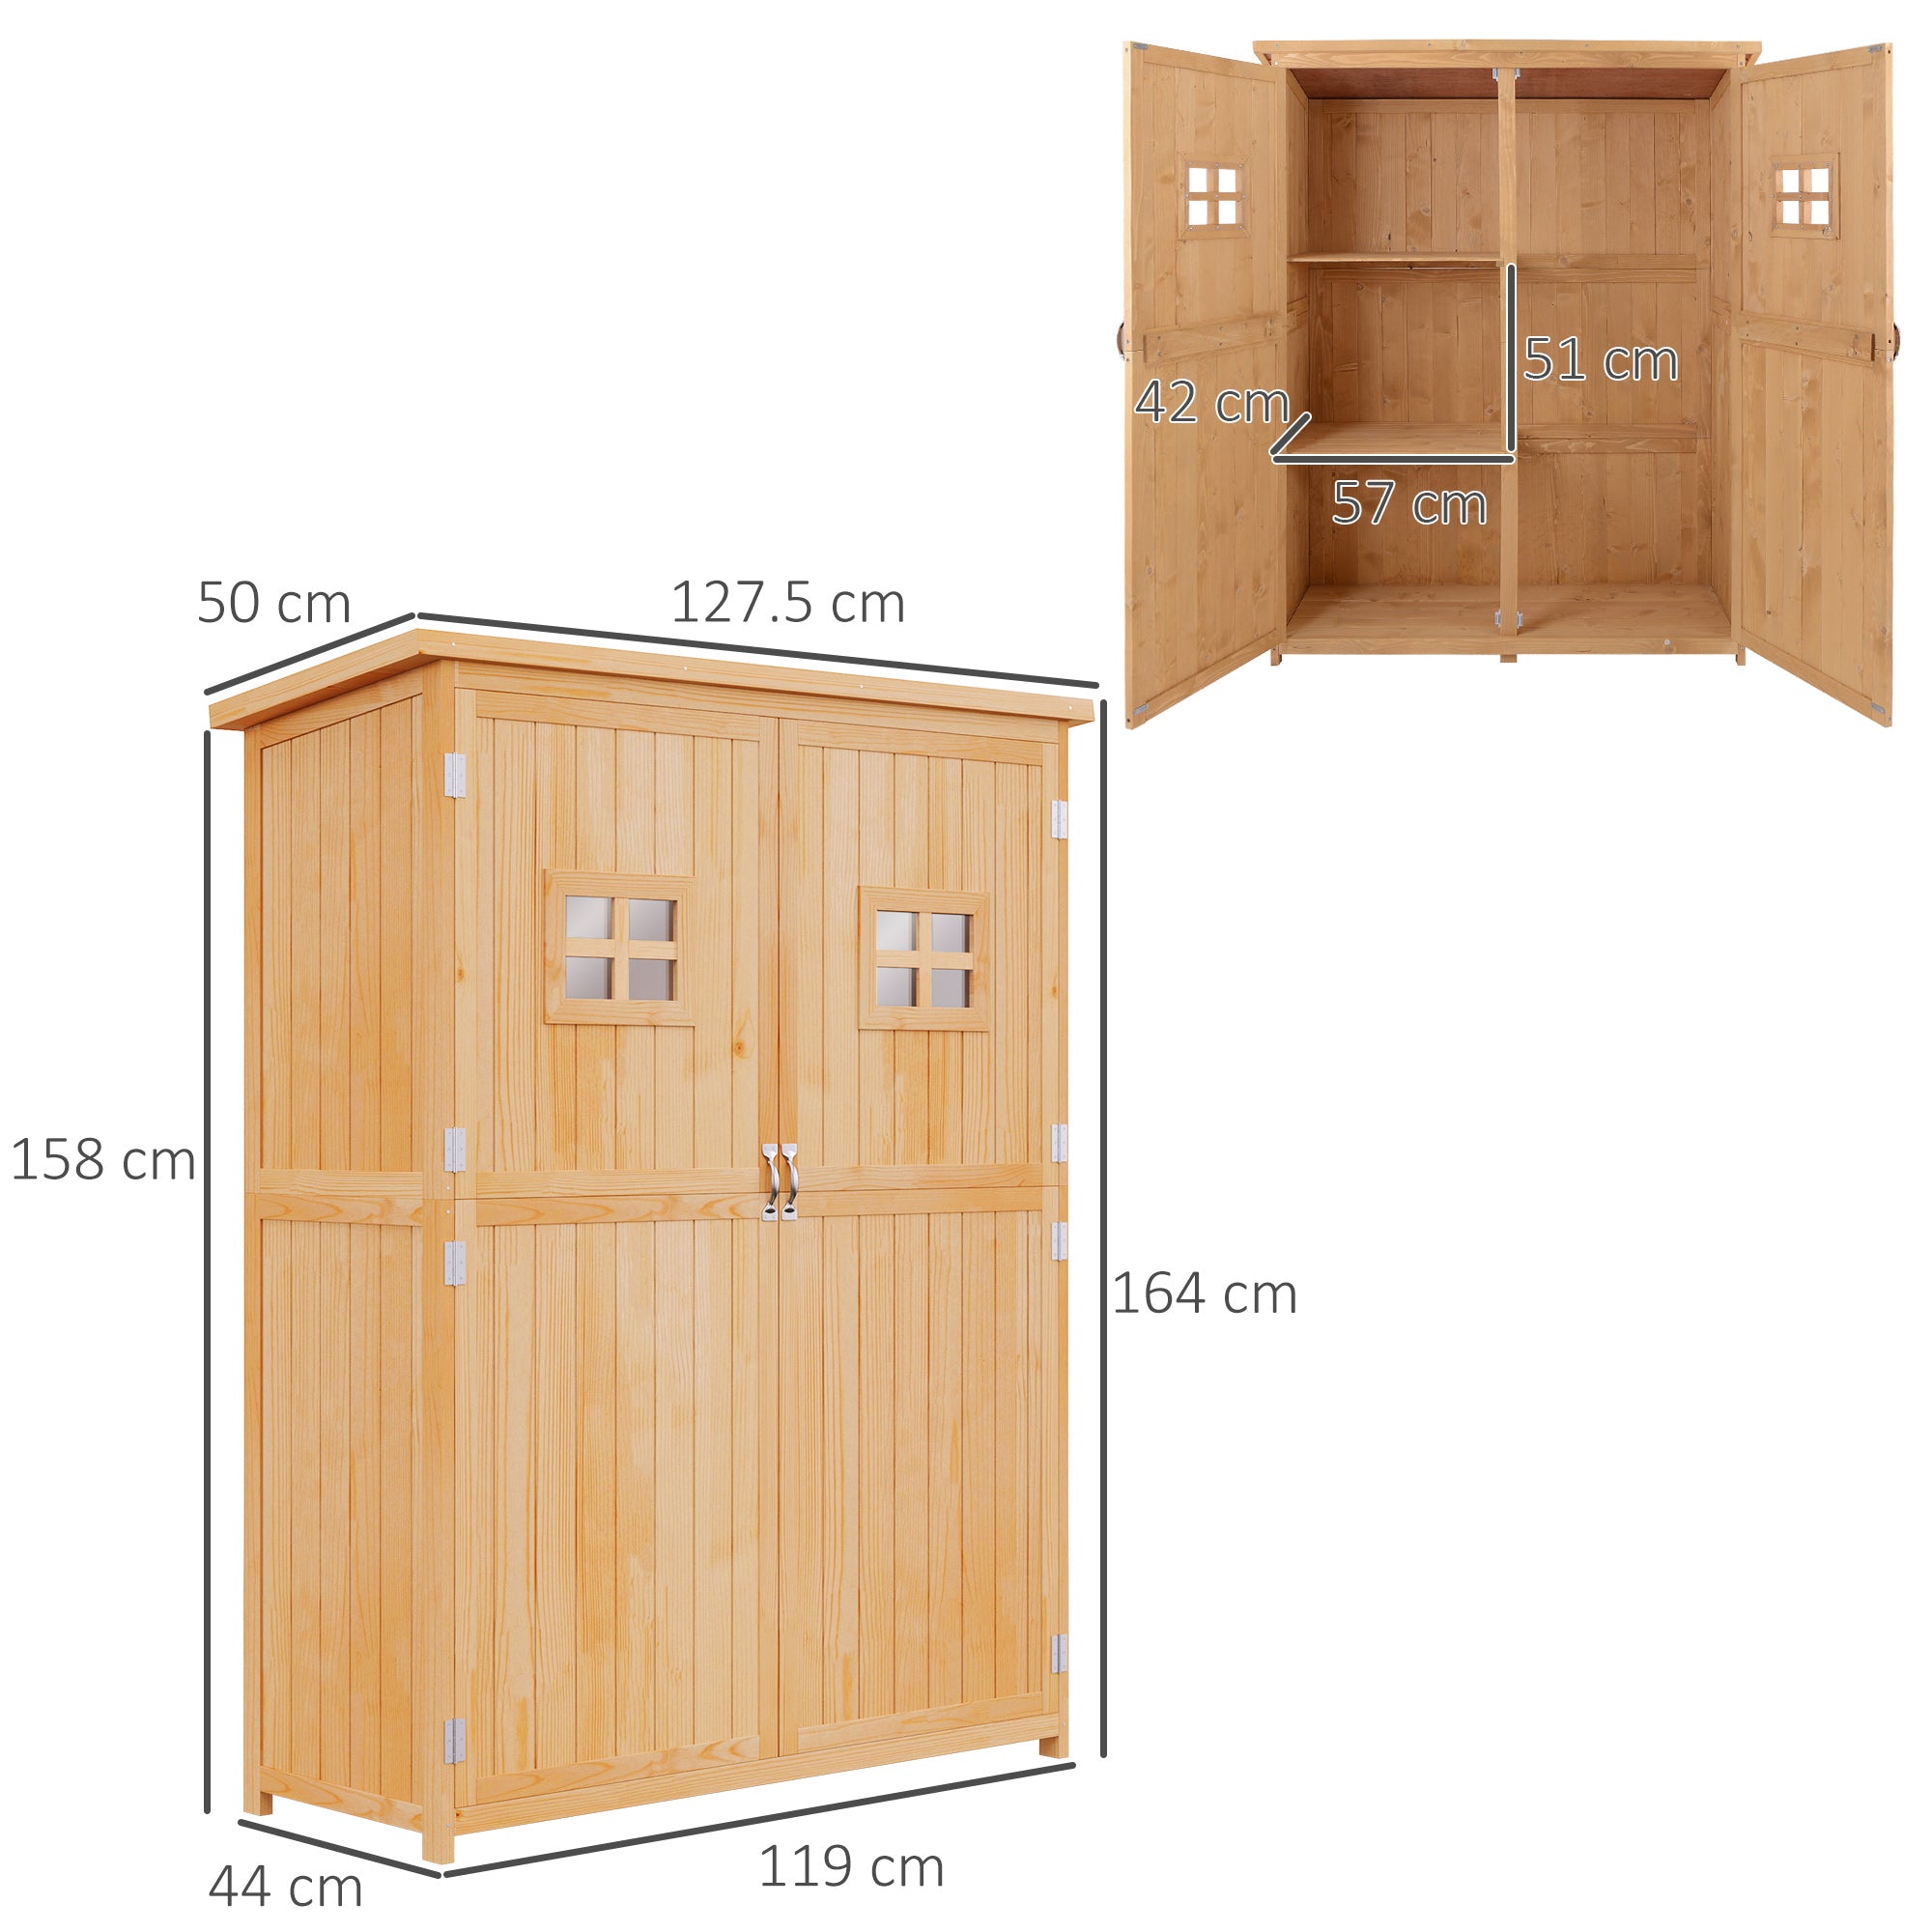 Outsunny Wooden Garden Storage Shed Tool Cabinet Organiser with Shelves, Two Windows, 127.5 x 50 x 164 cm, Natural